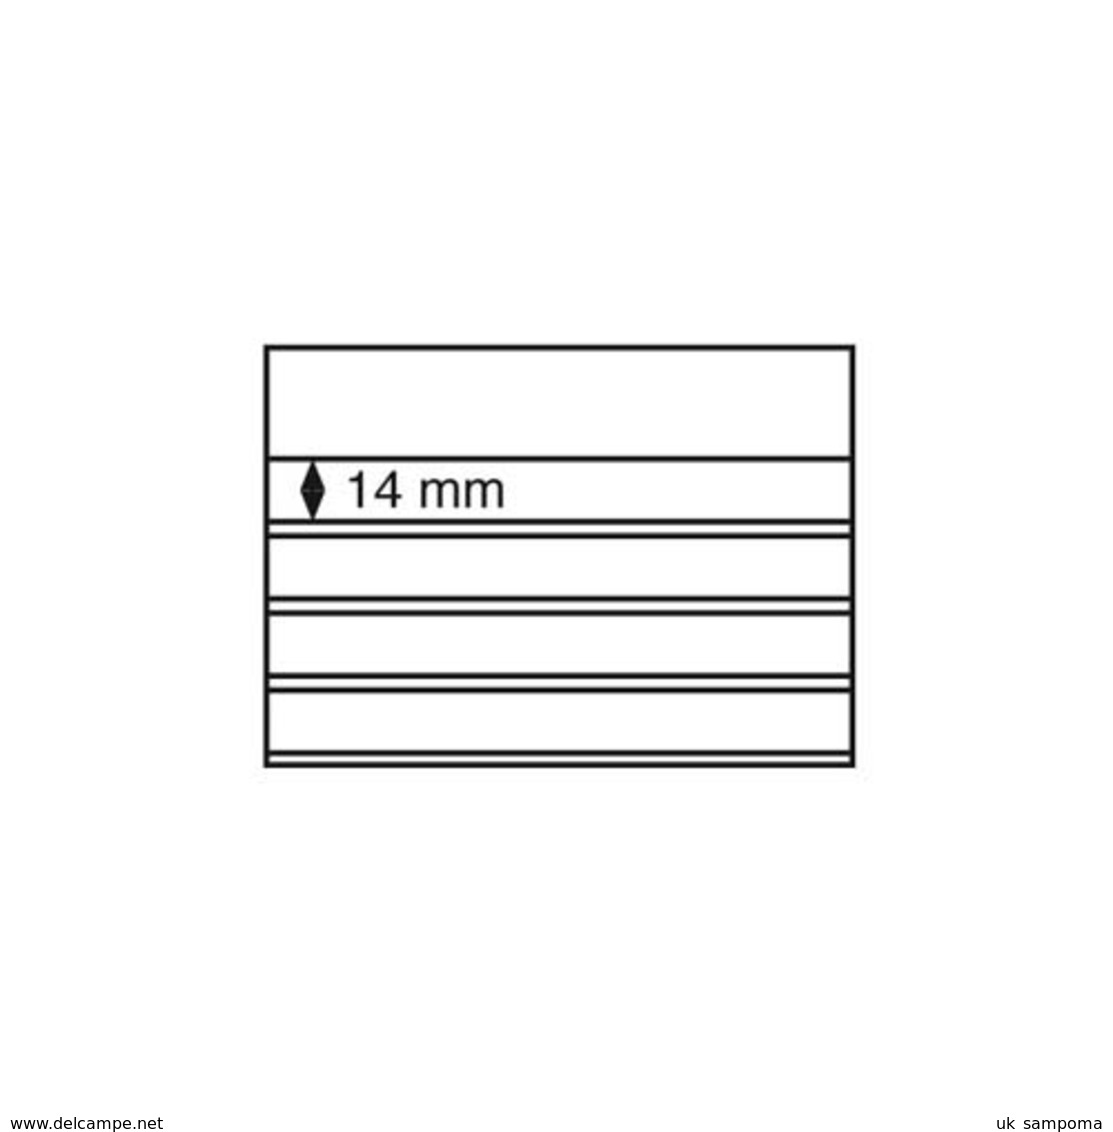 Standard Cards PVC 158x113 Mm,l4 Clear Strips With Cover Sheet, Black Card, 100 Per Pack - Einsteckkarten